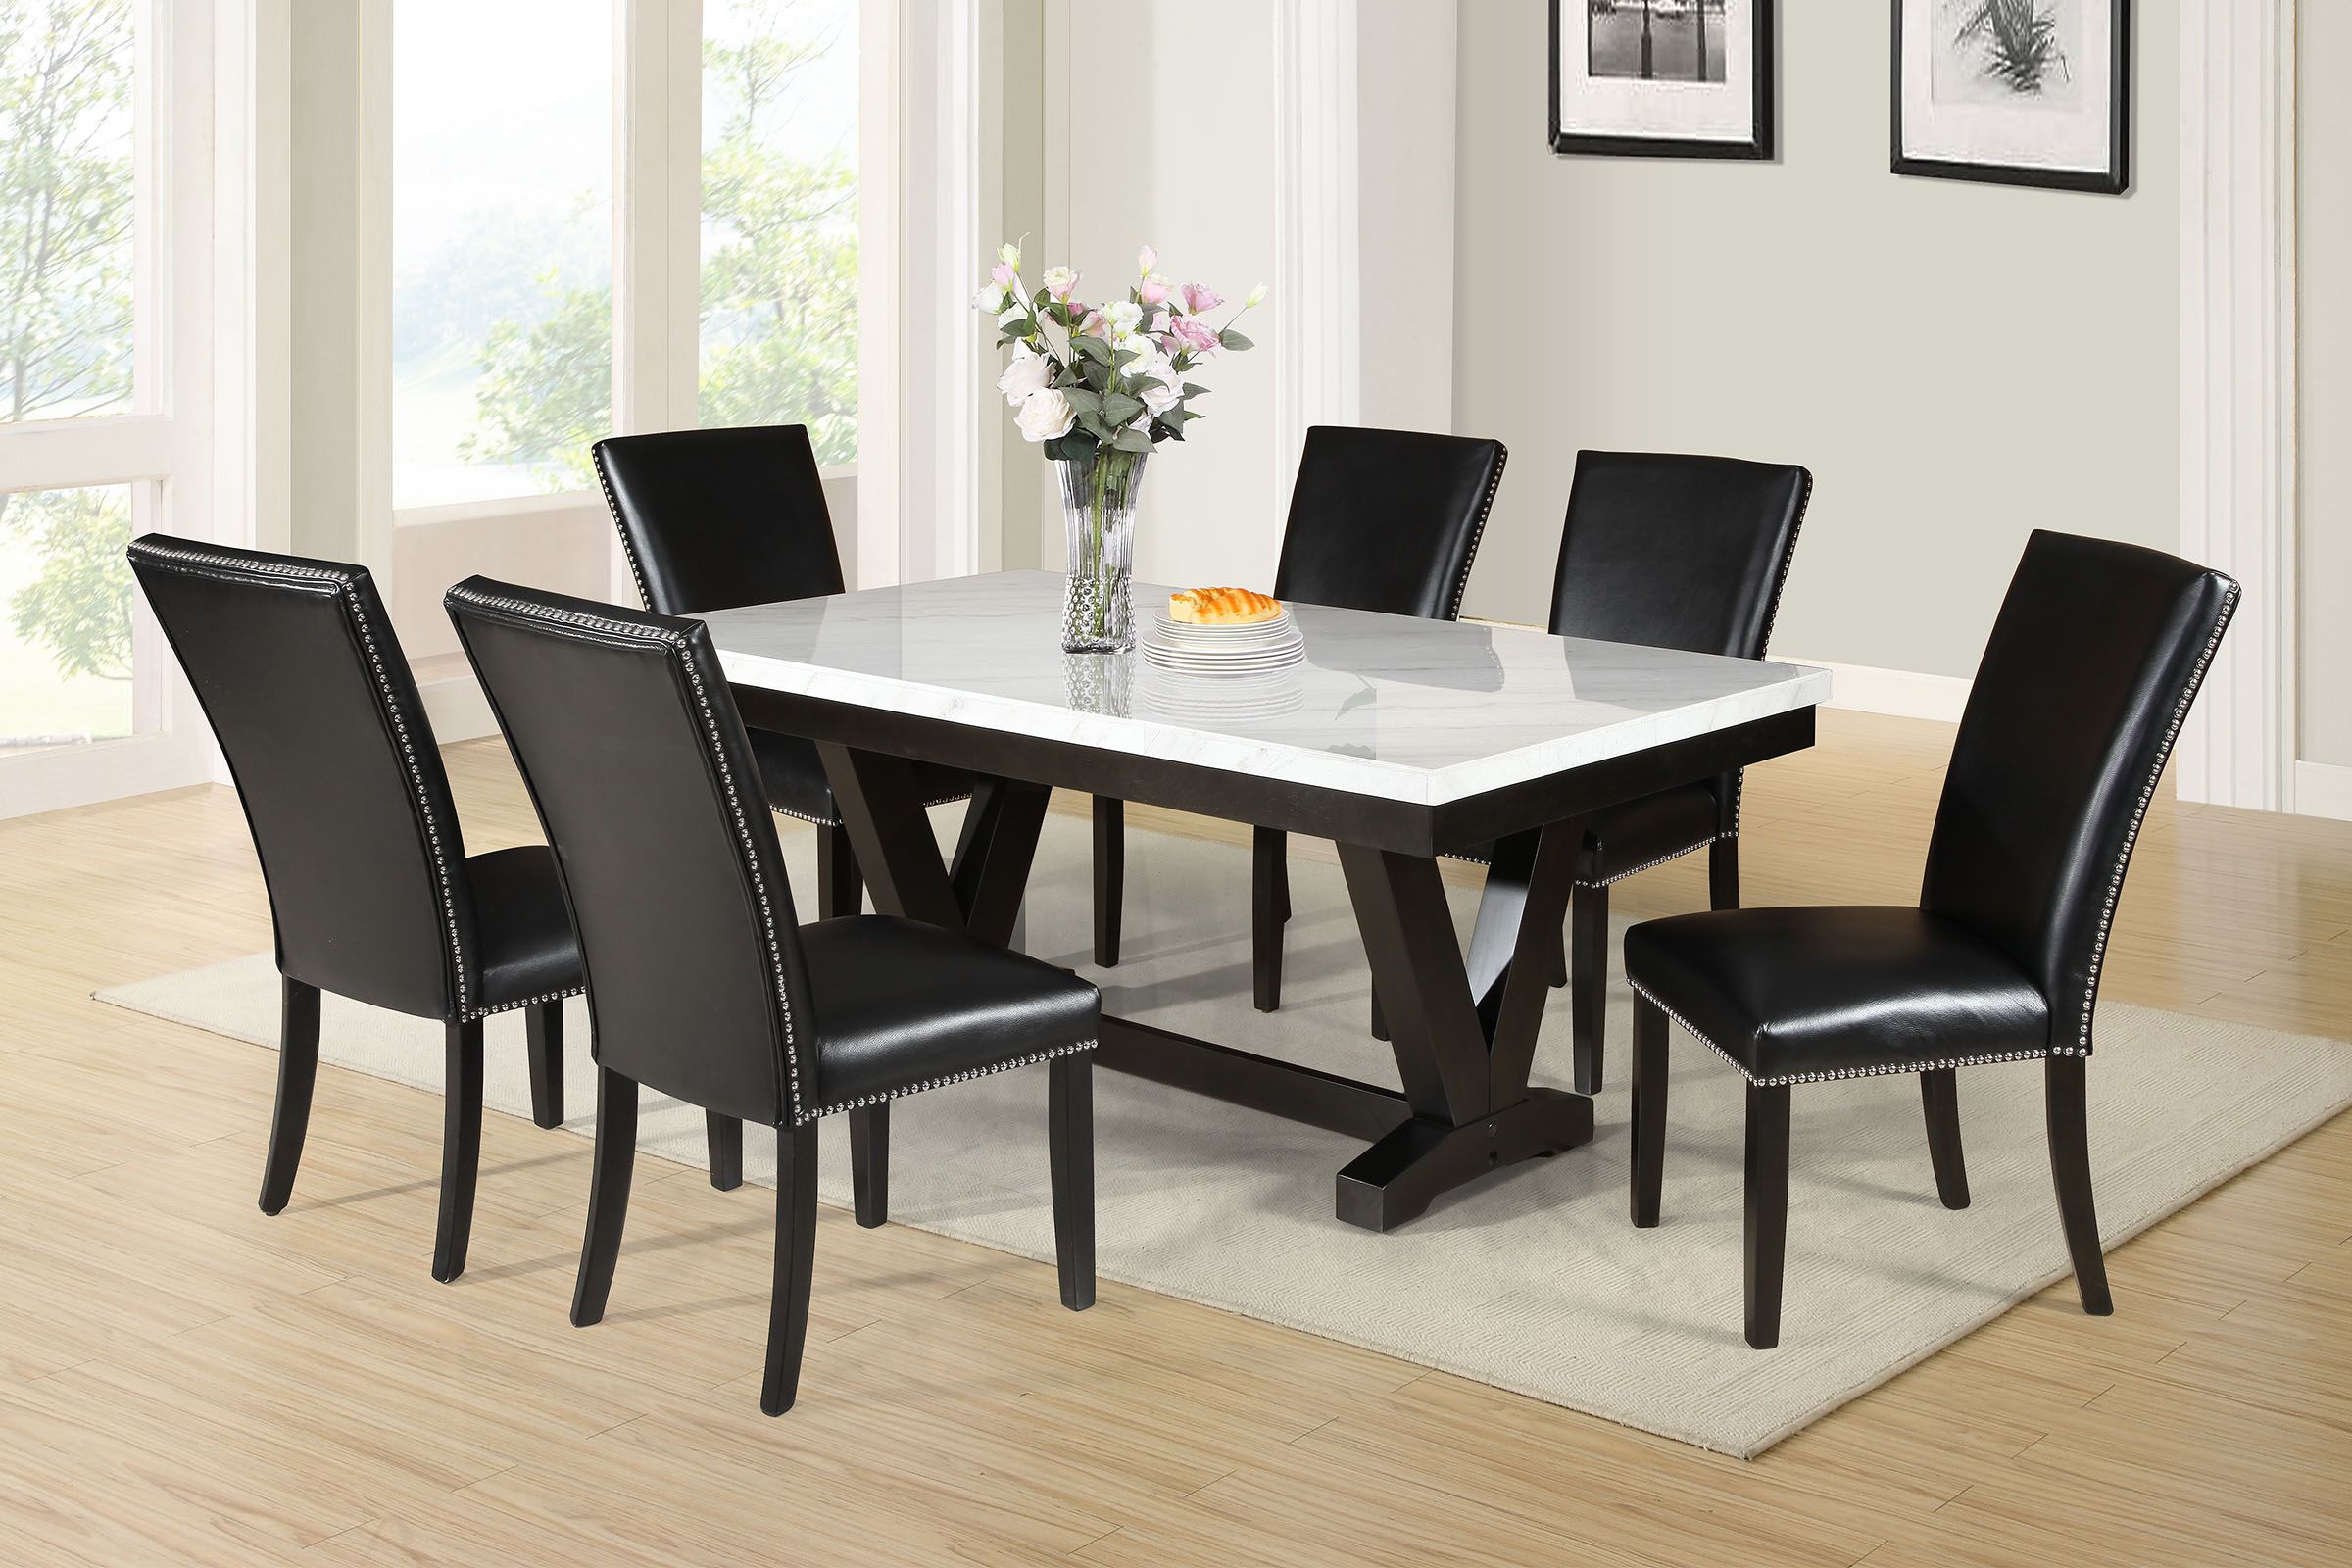 Finley Rectangular Table + 4 Chairs